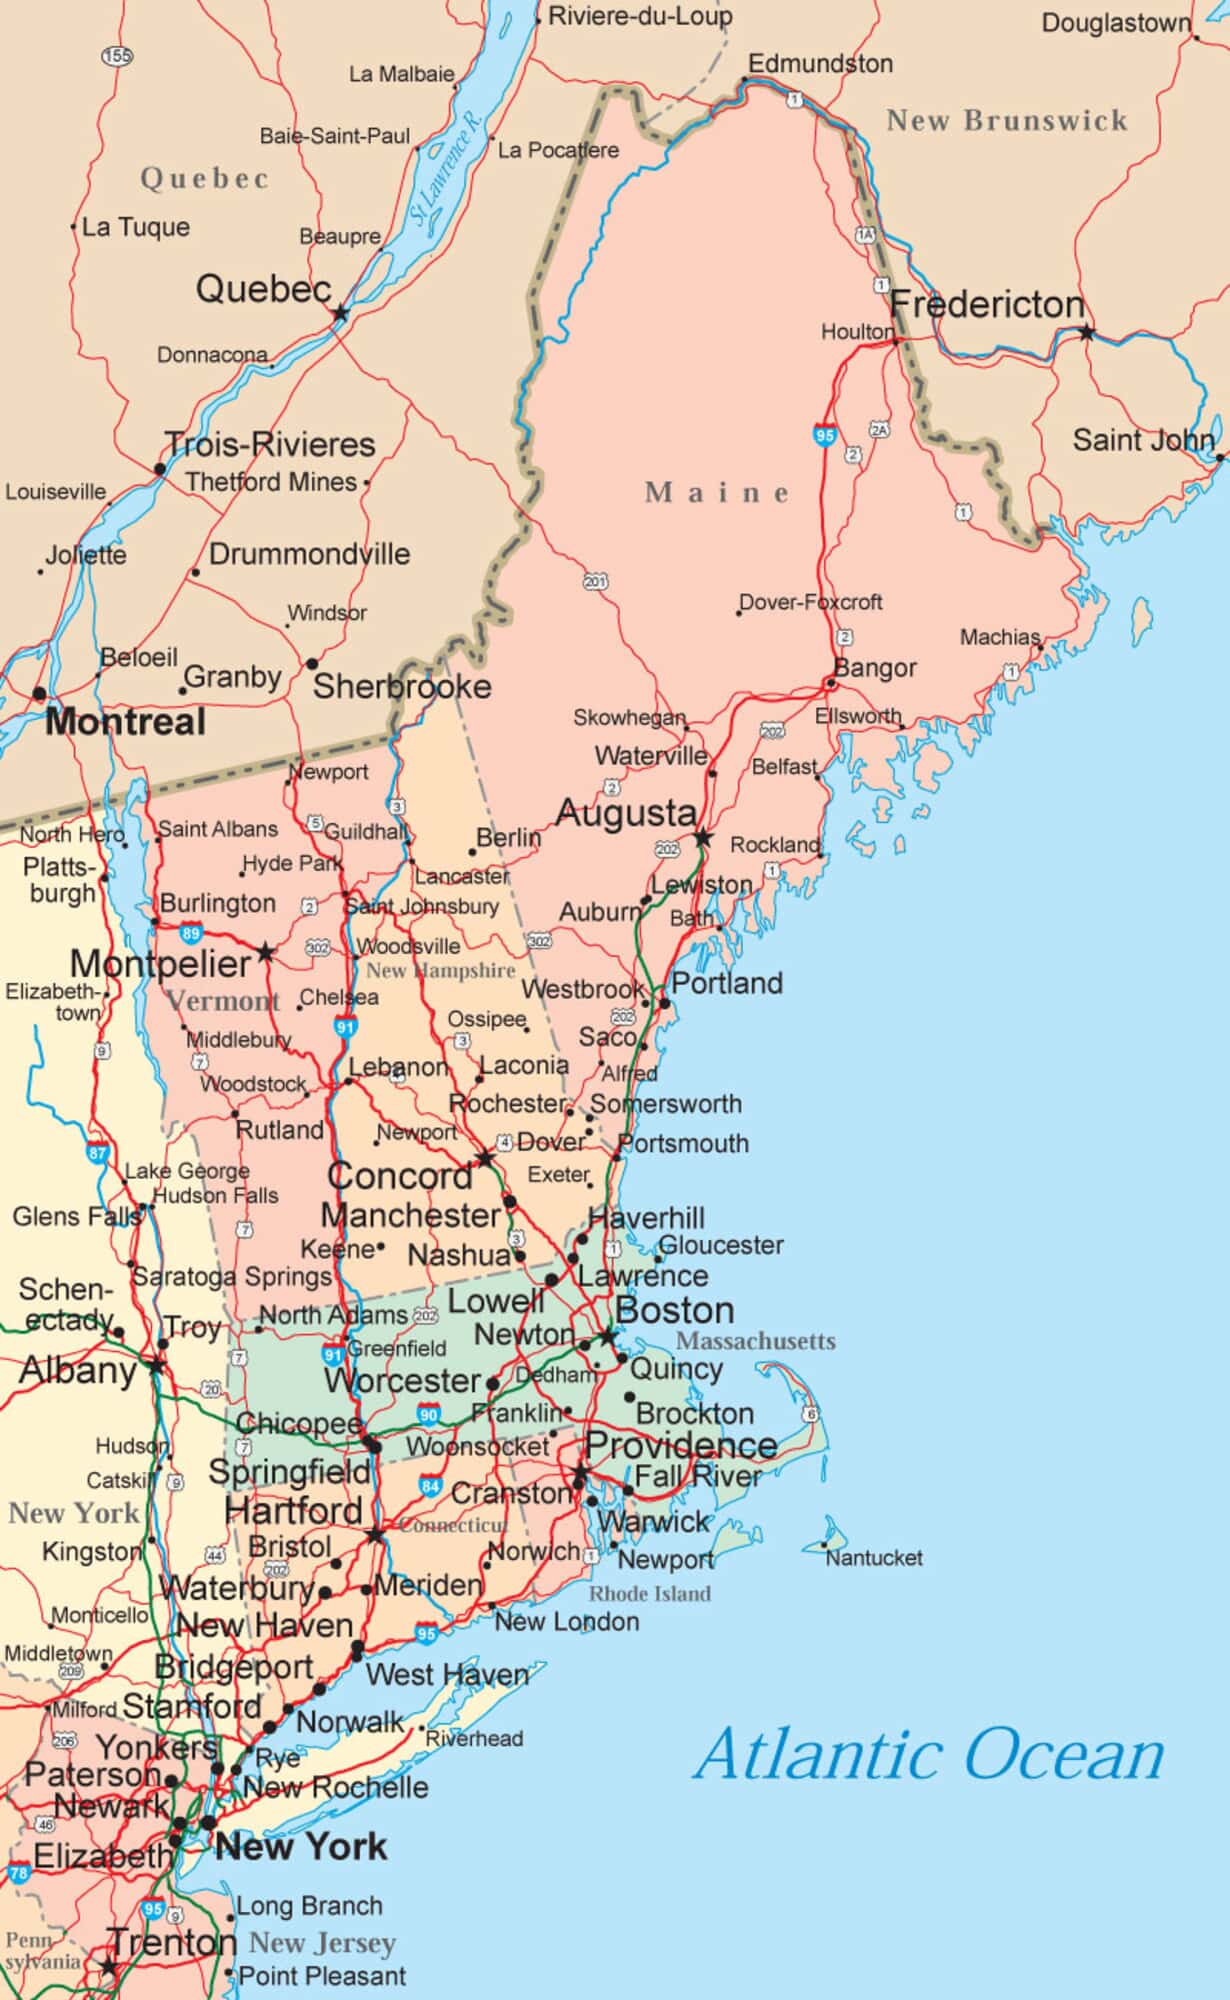 New England 800 ?scale.option=fill&scale.height=2000&quality=60